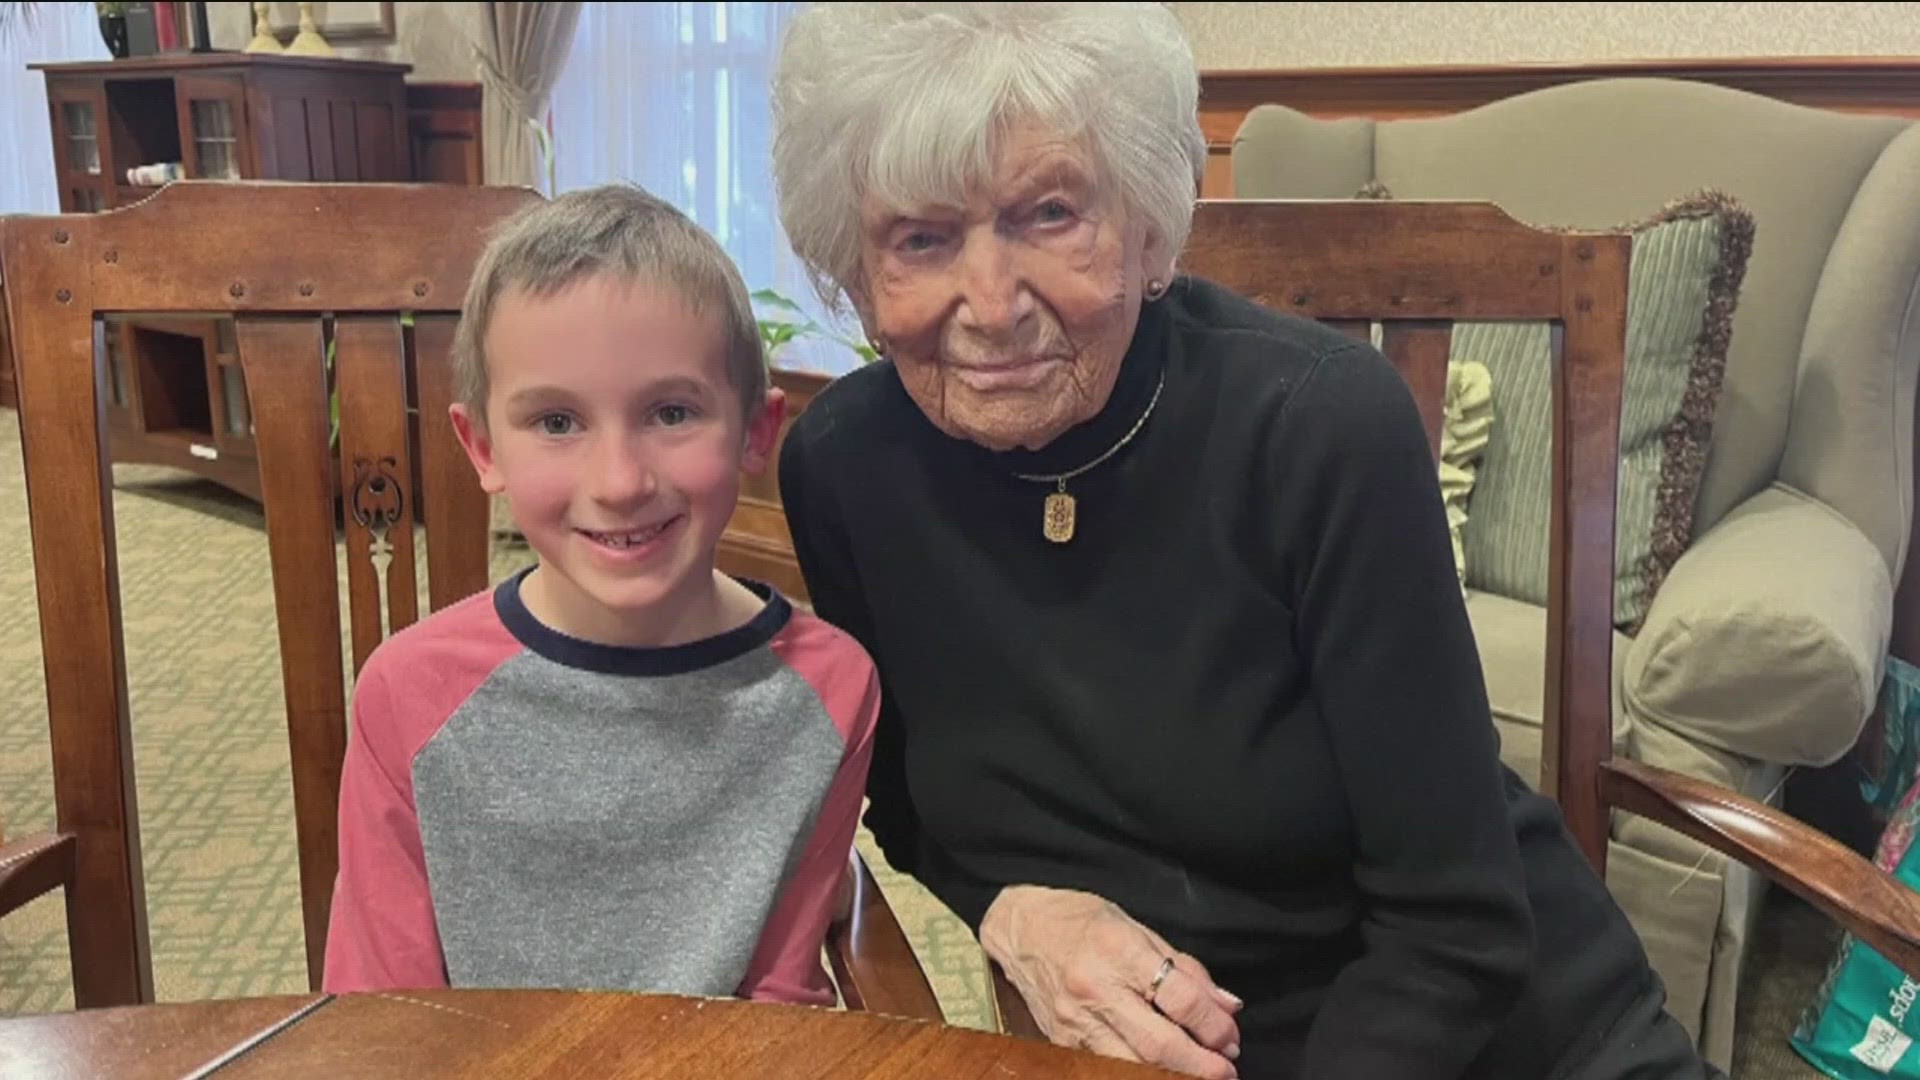 A 100-year-old woman and a 6-year-old boy have become the best of friends. WJAR's Sam Read has the heartwarming story.